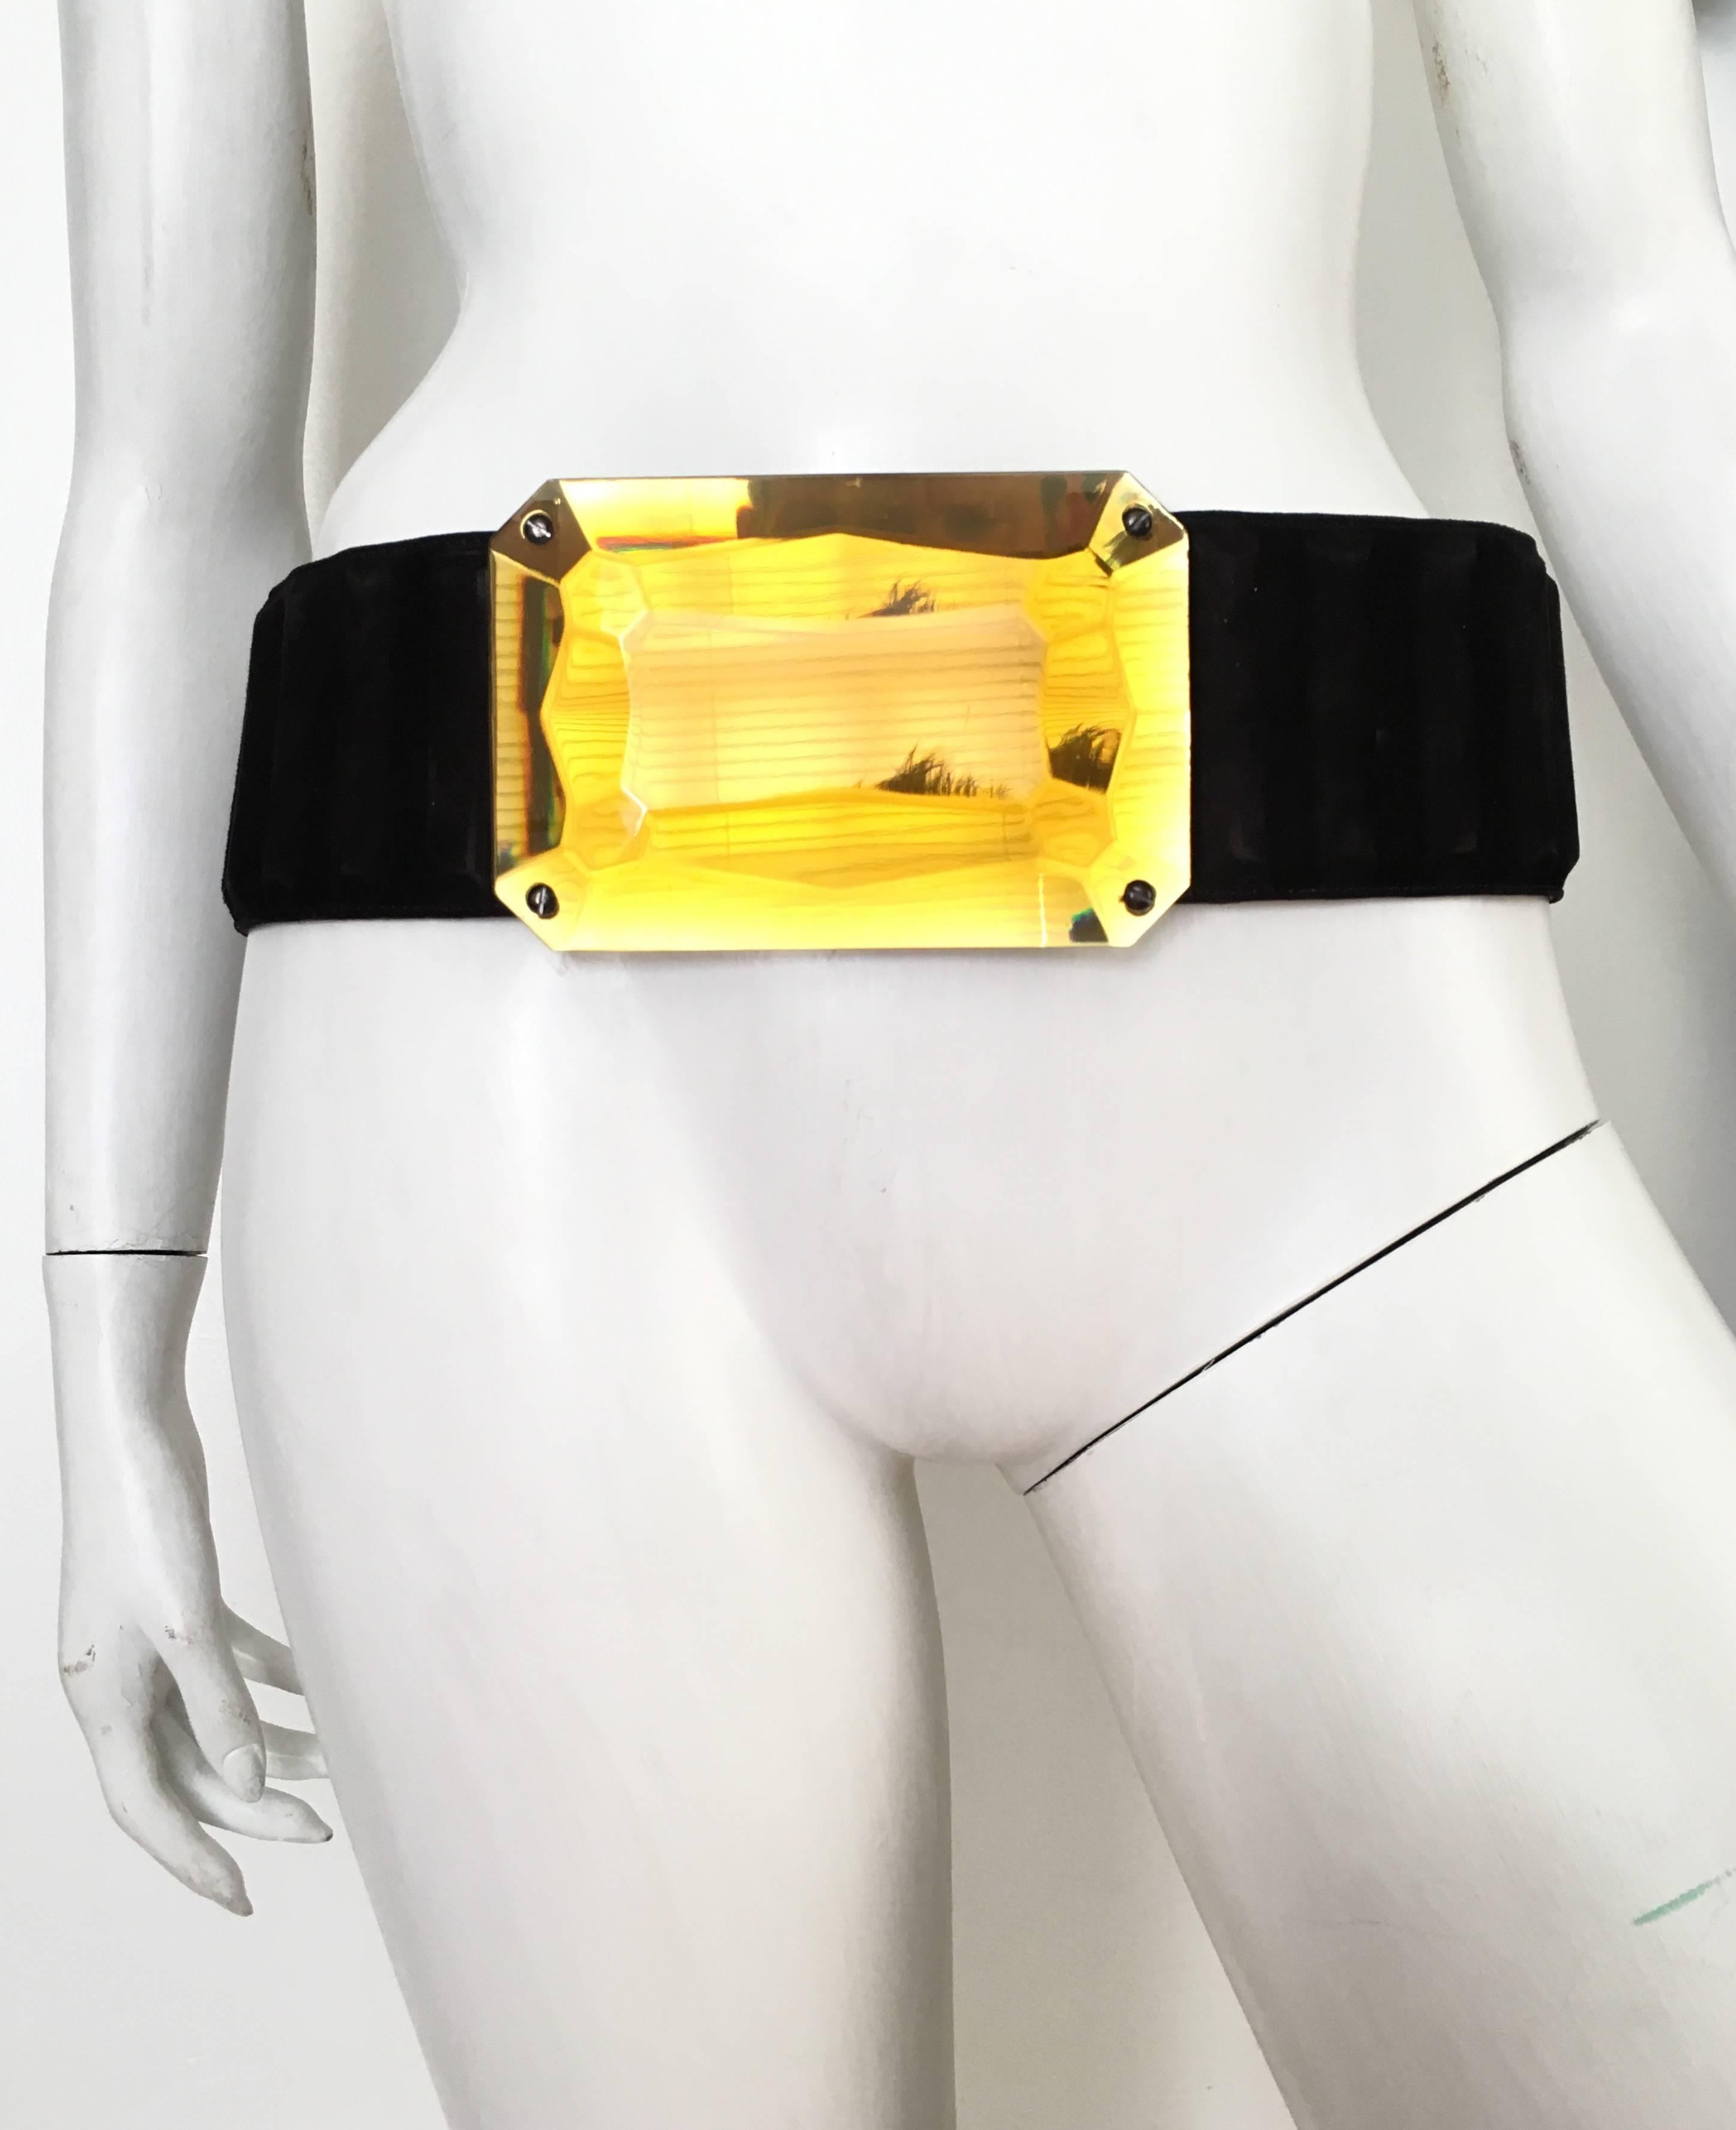 Fendi designed by Karl Lagerfeld emerald cut lucite chunky buckle with black suede belt strap is a size 34. There is a little stretch in the belt strap on the back side as shown in photo.  This eye POPing design will turn all the heads in your